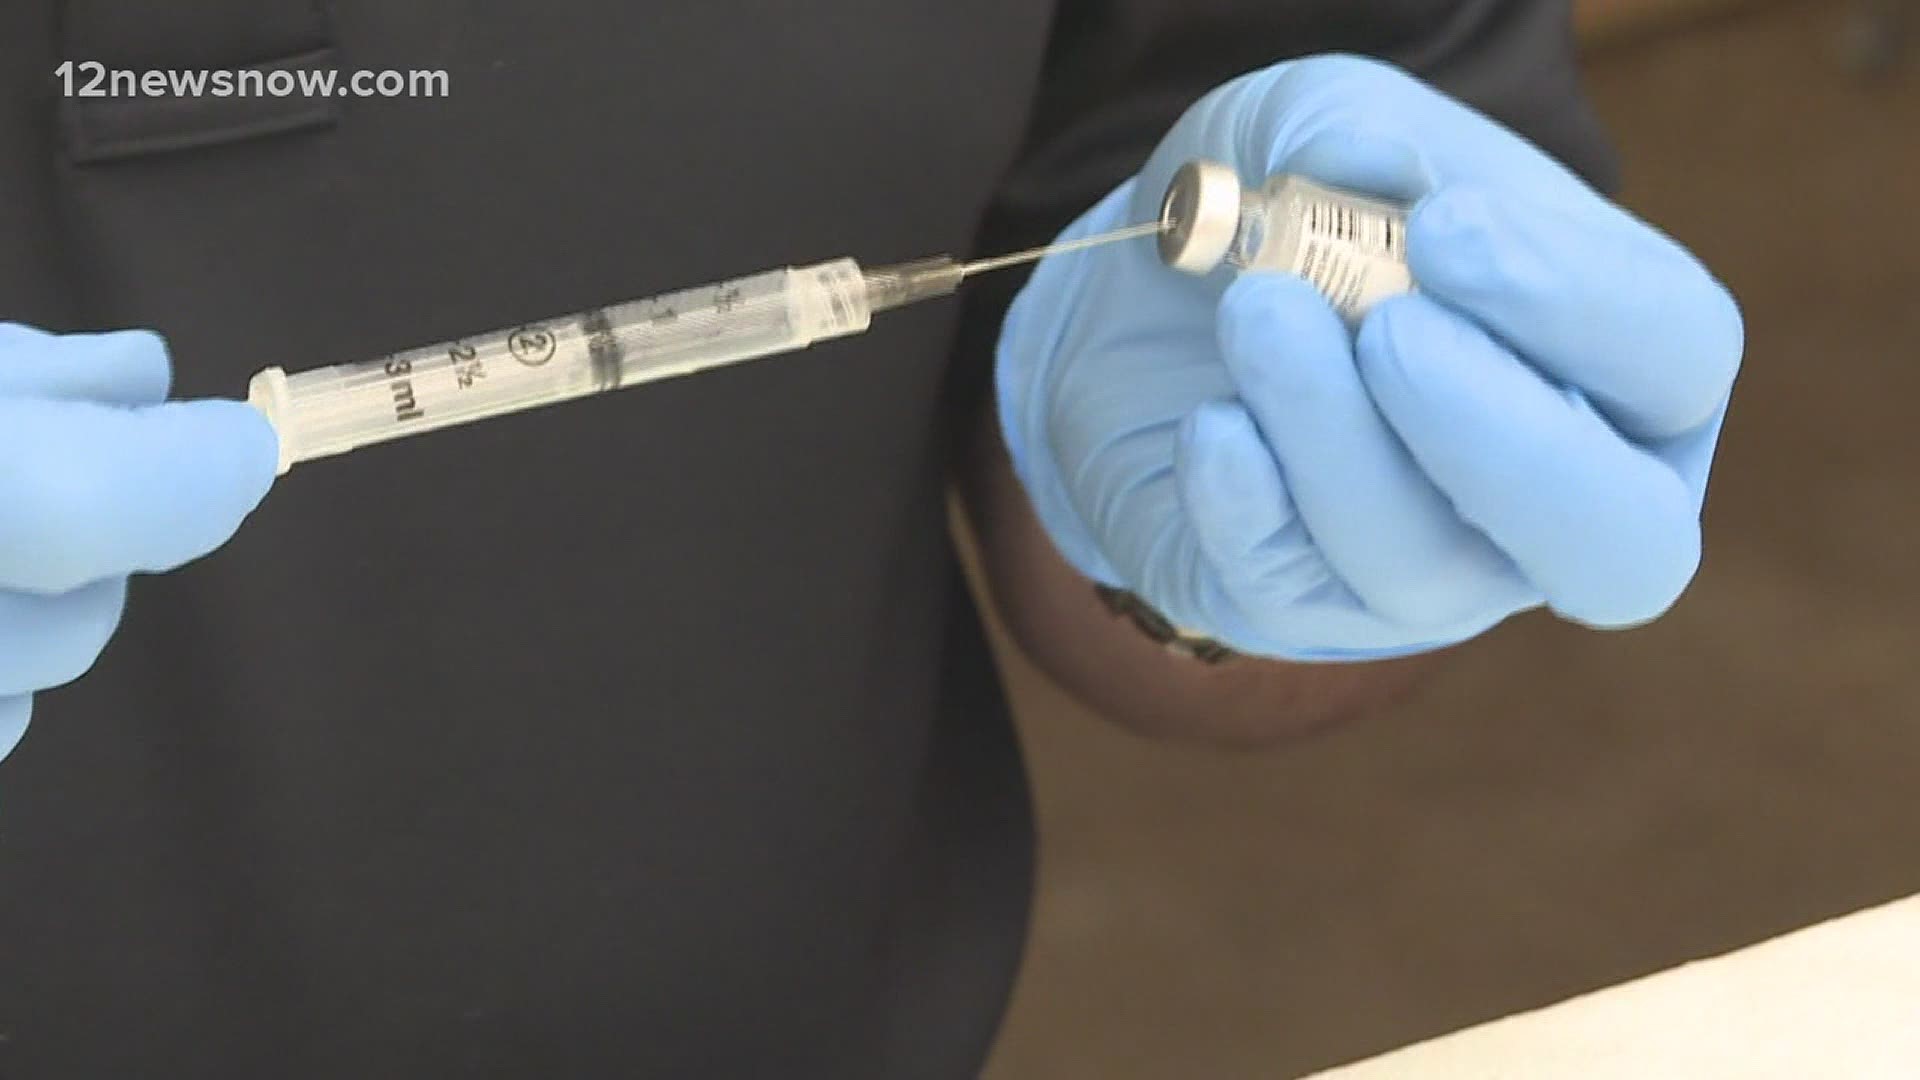 One Beaumont doctor says he's not surprised that some people have their own reasons why they're not getting the vaccine.